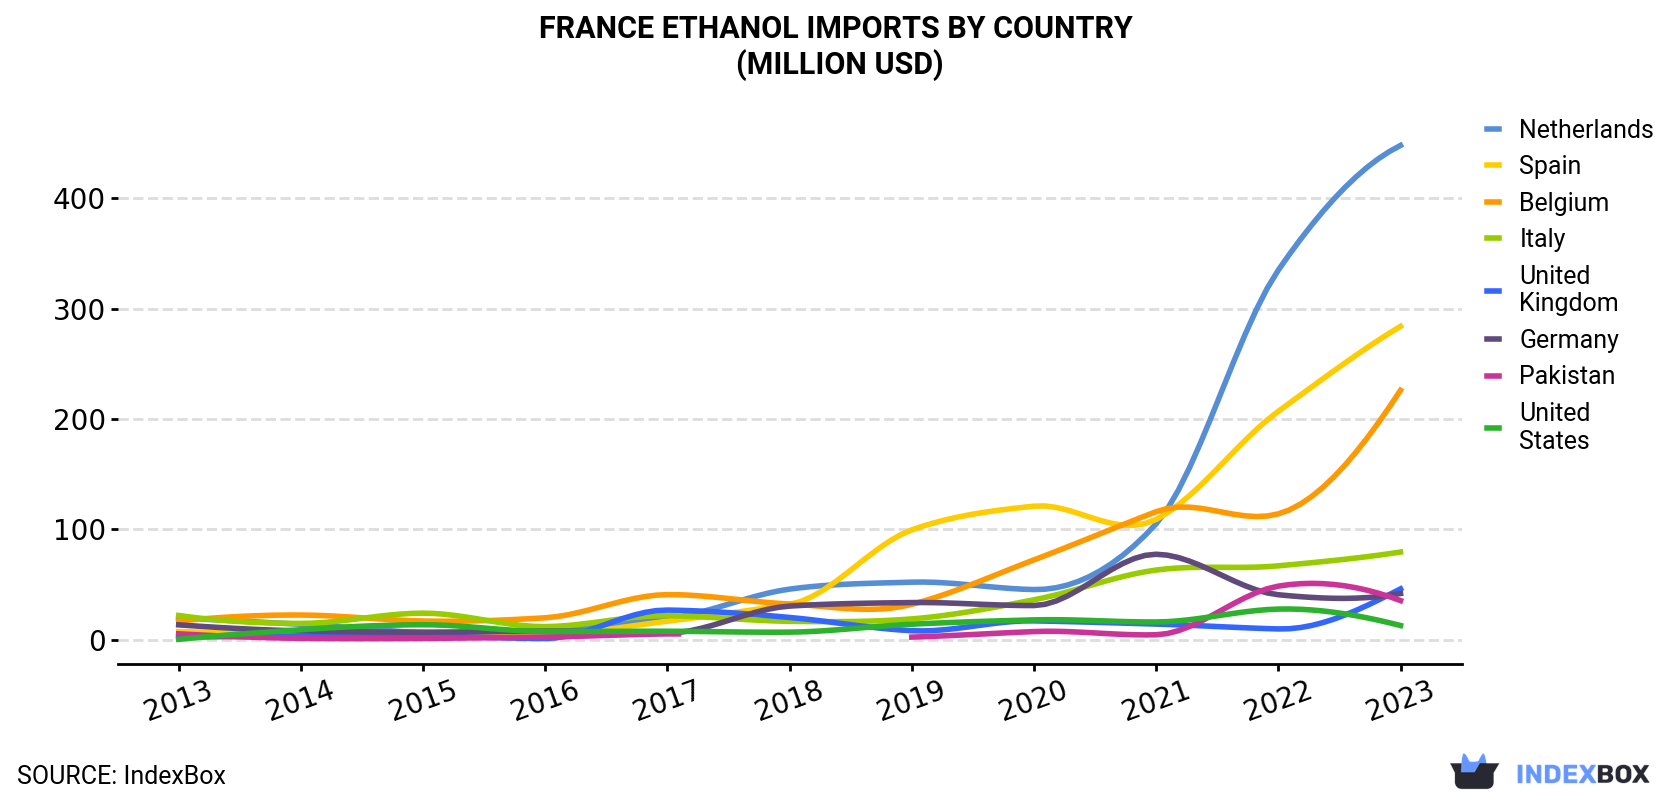 France Ethanol Imports By Country (Million USD)